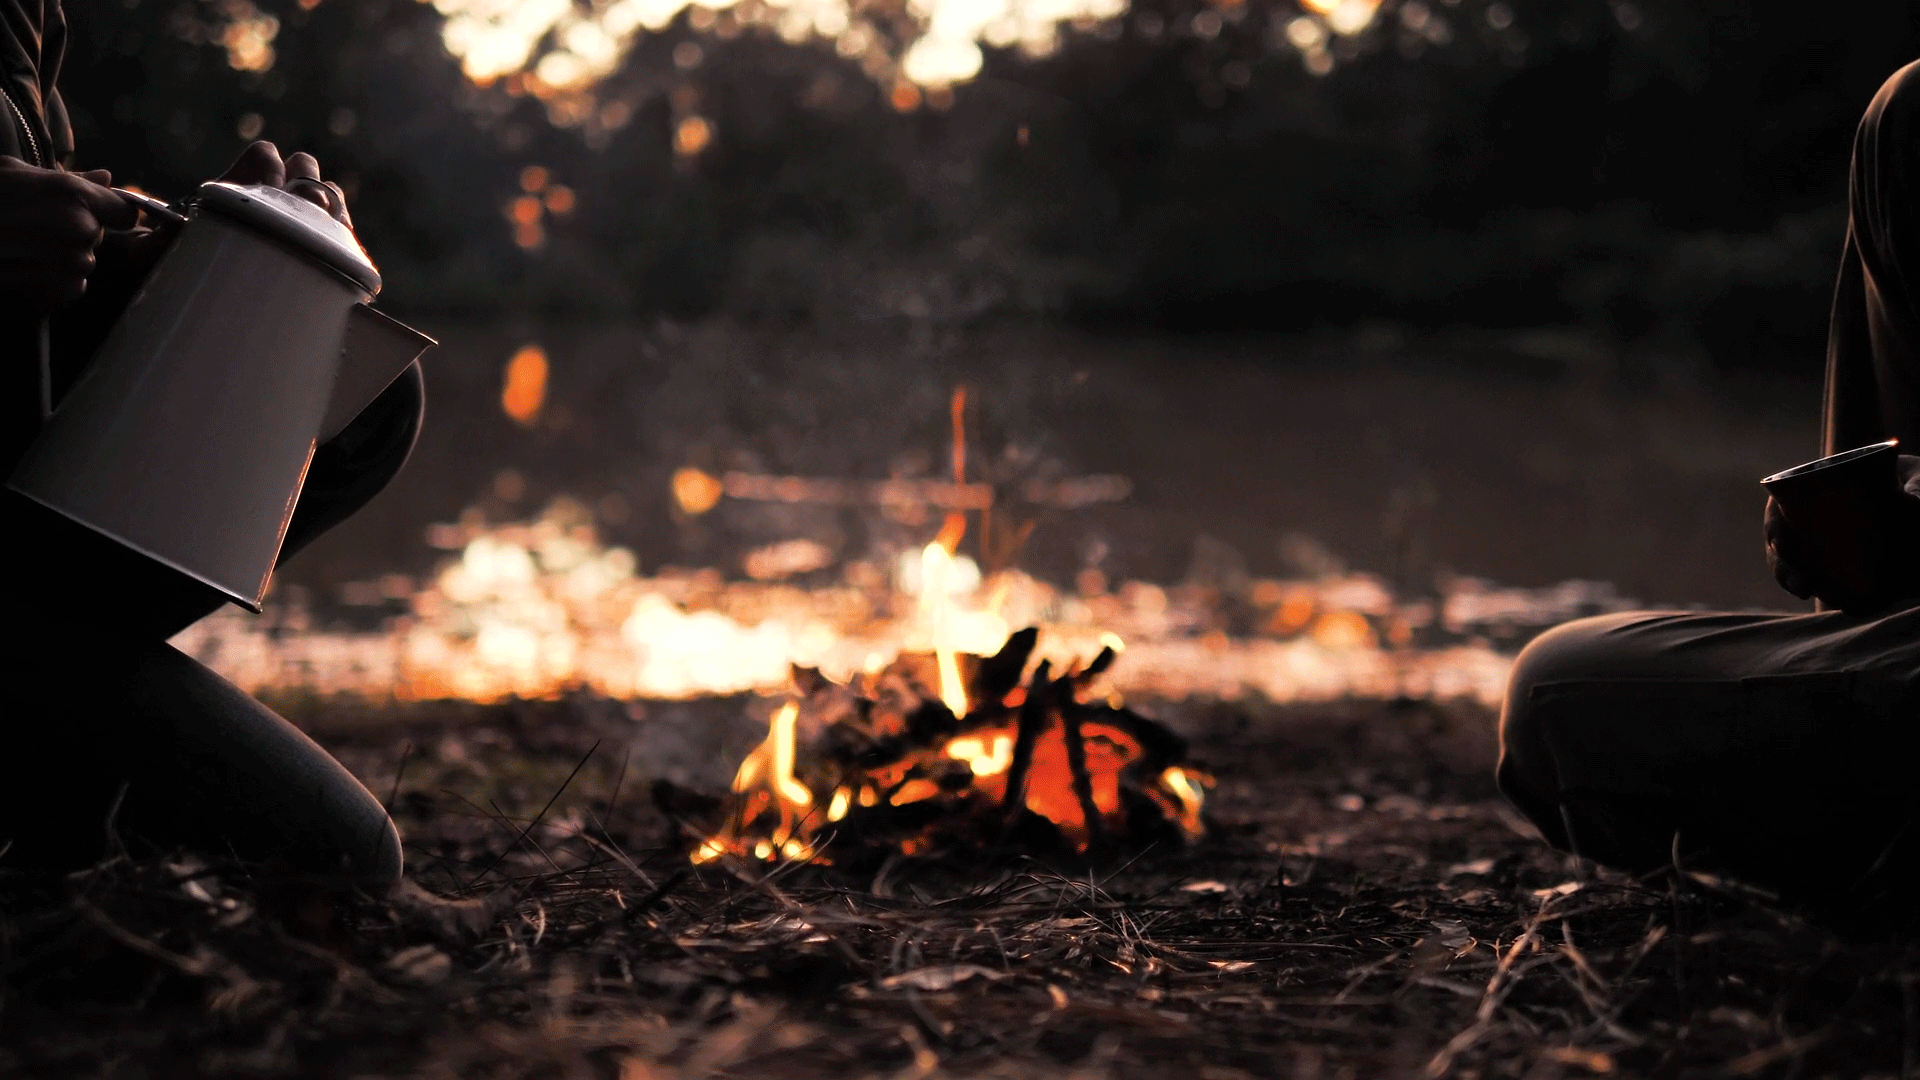 A Cinemagraph of a campfire